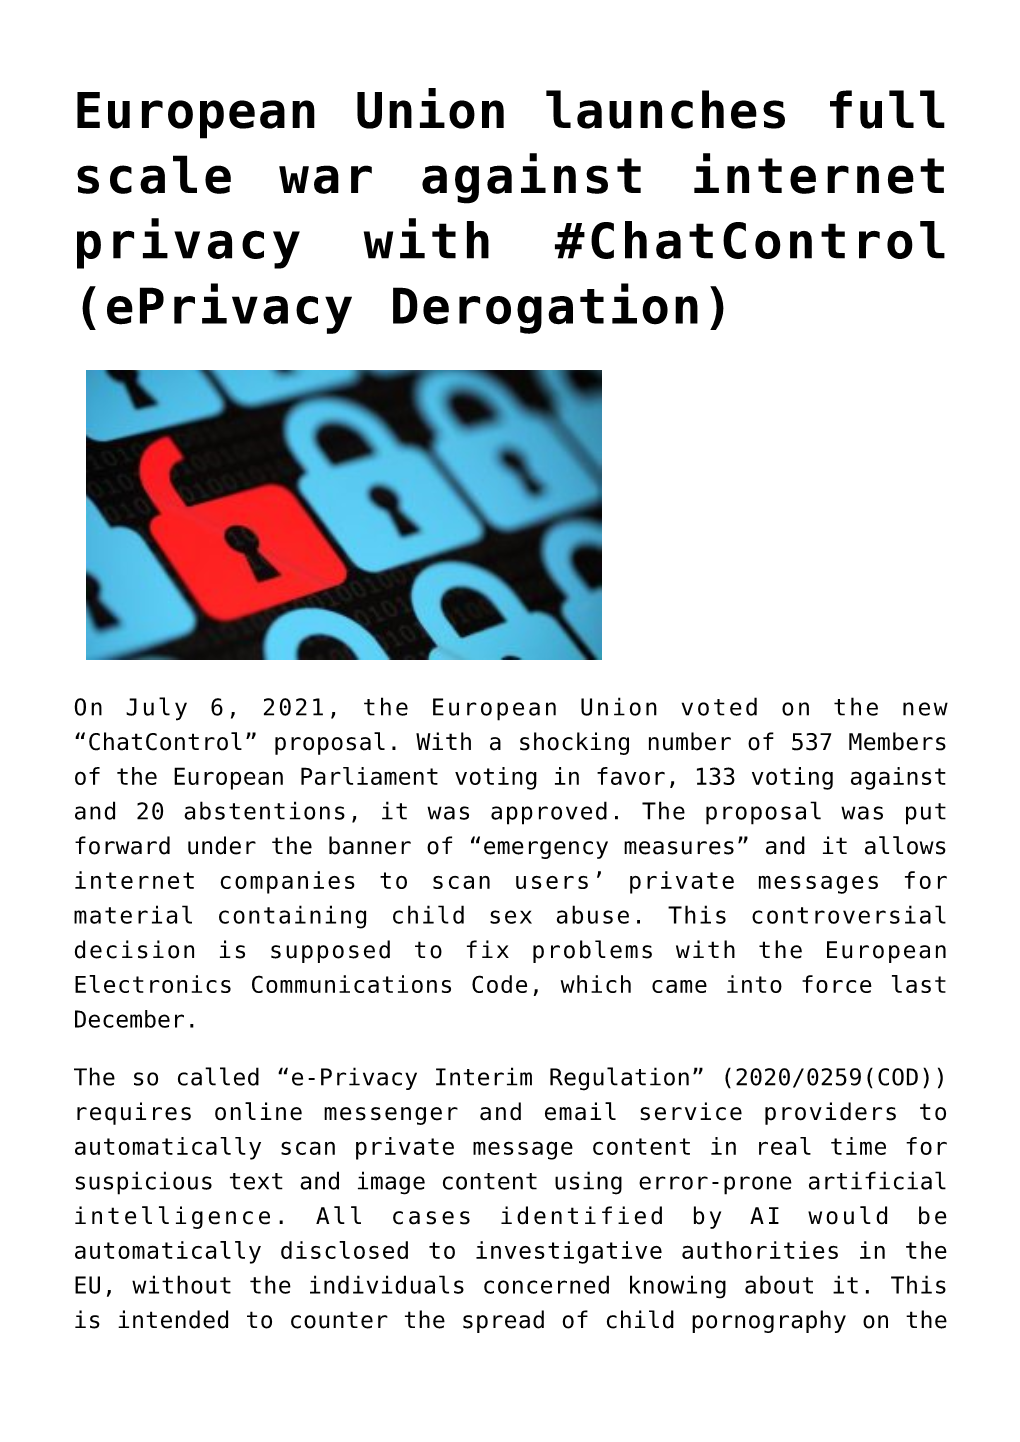 European Union Launches Full Scale War Against Internet Privacy with #Chatcontrol (Eprivacy Derogation)